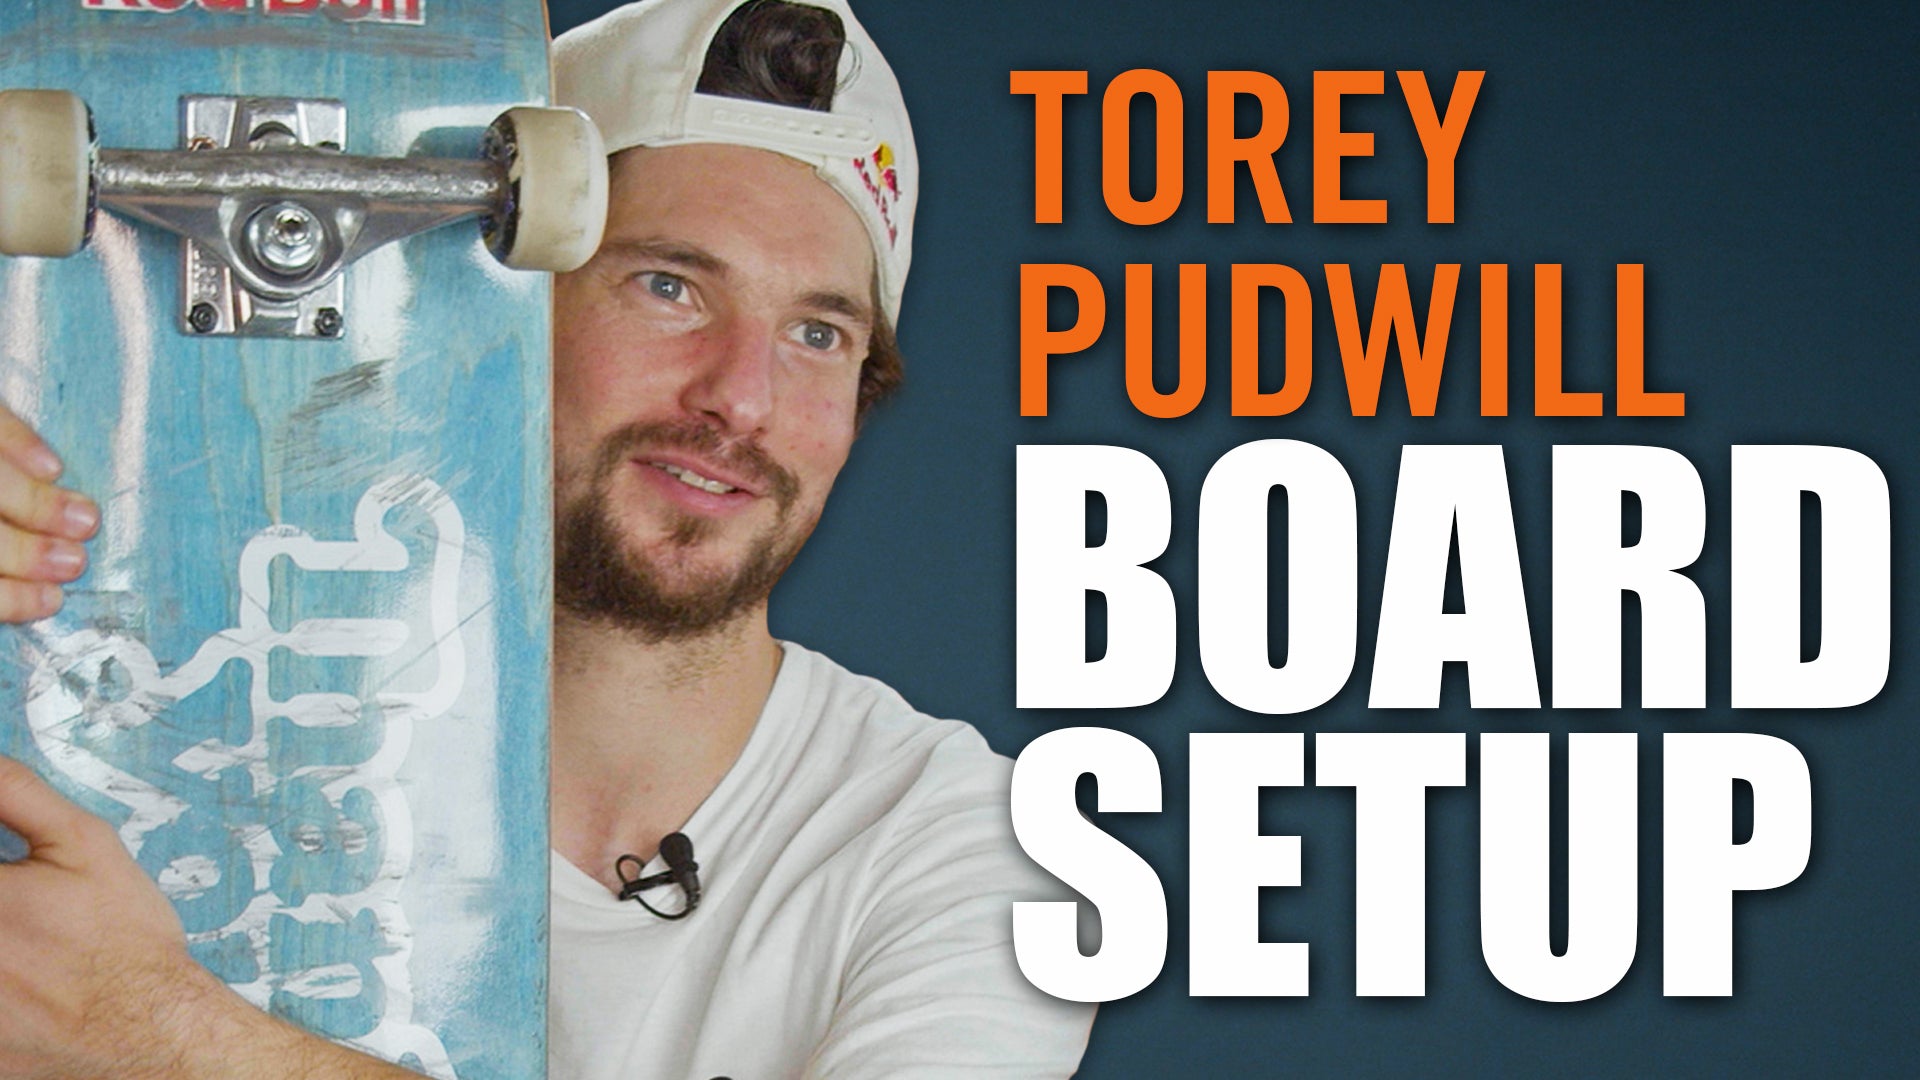 Torey Pudwill Breaks Down His Board Set Up